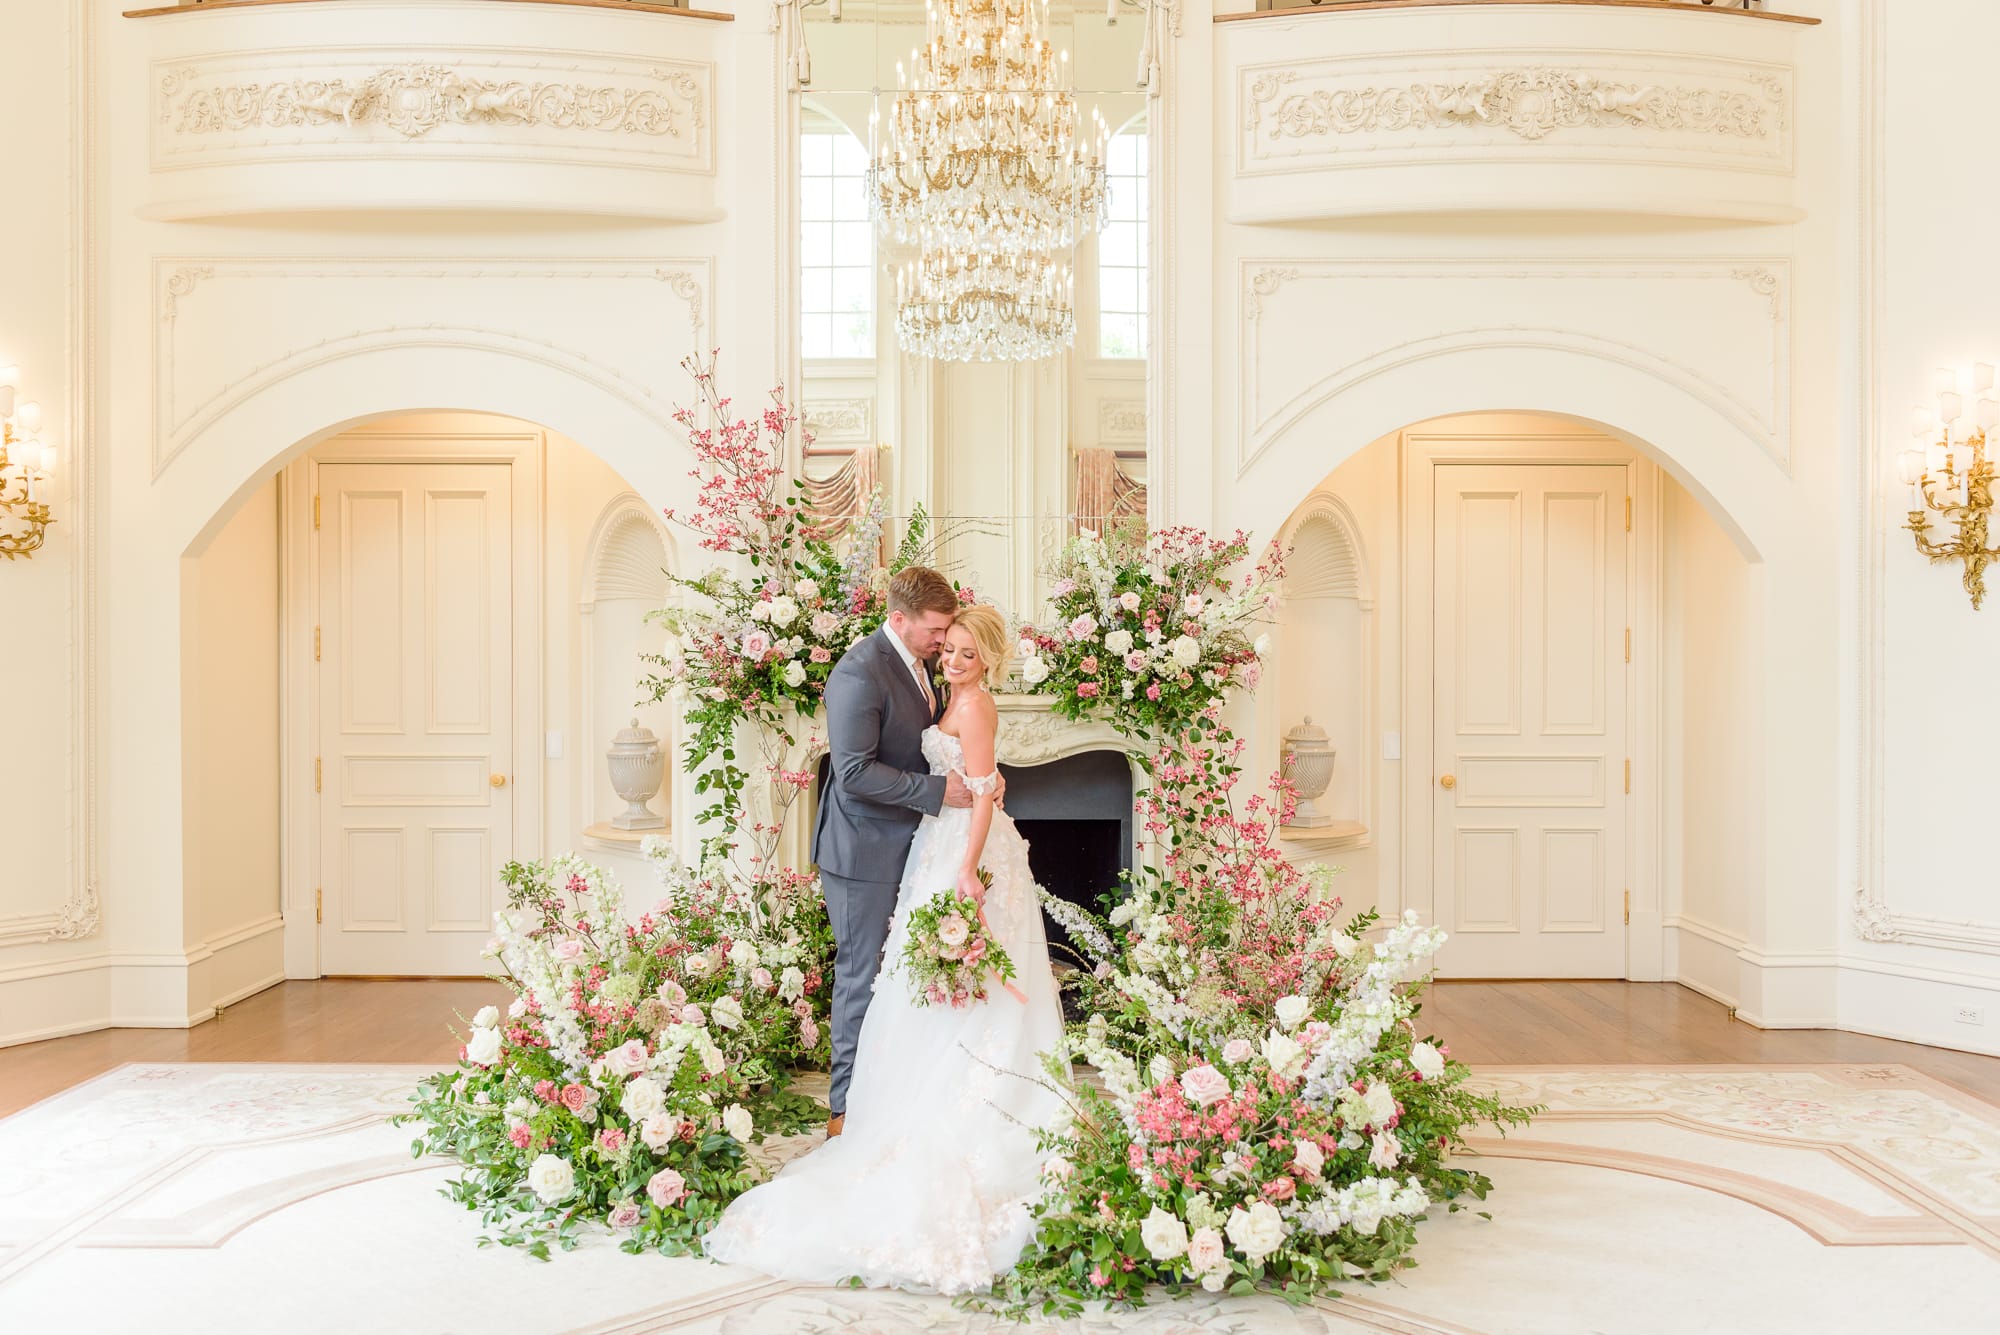 An elegant display of florals is placed all around the fireplace at this mansion wedding.